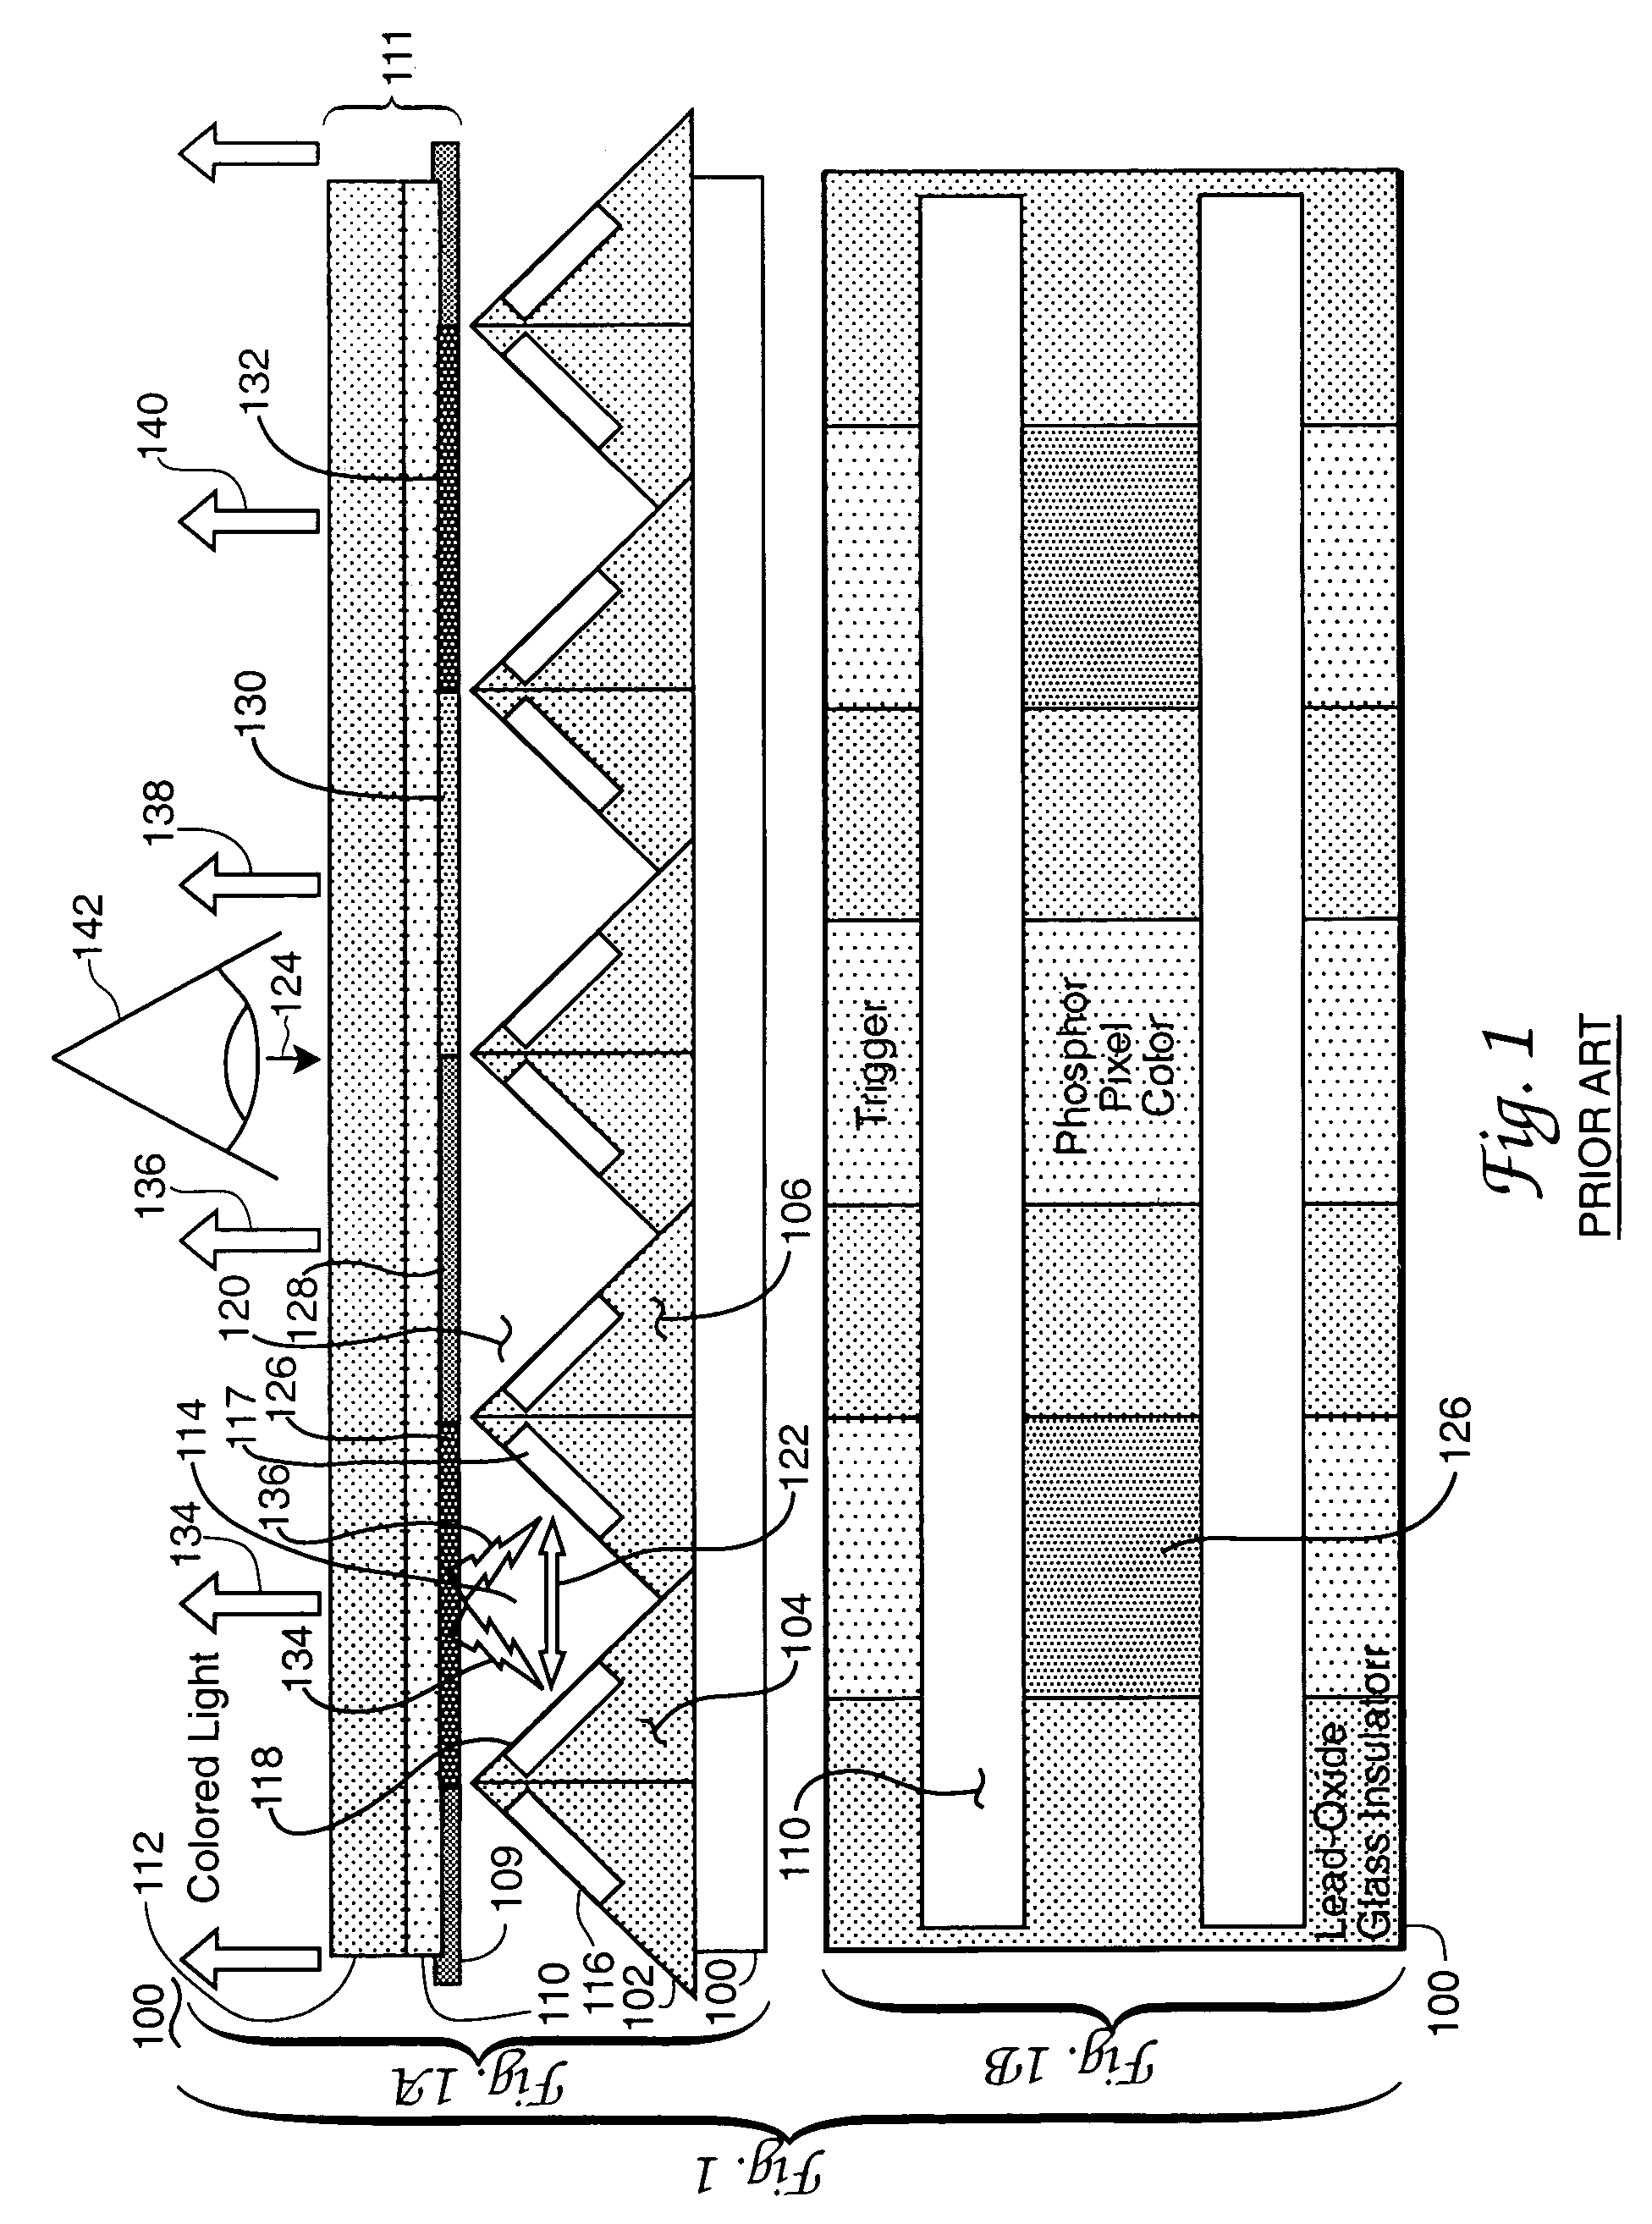 Reflective dynamic plasma steering apparatus for radiant electromagnetic energy